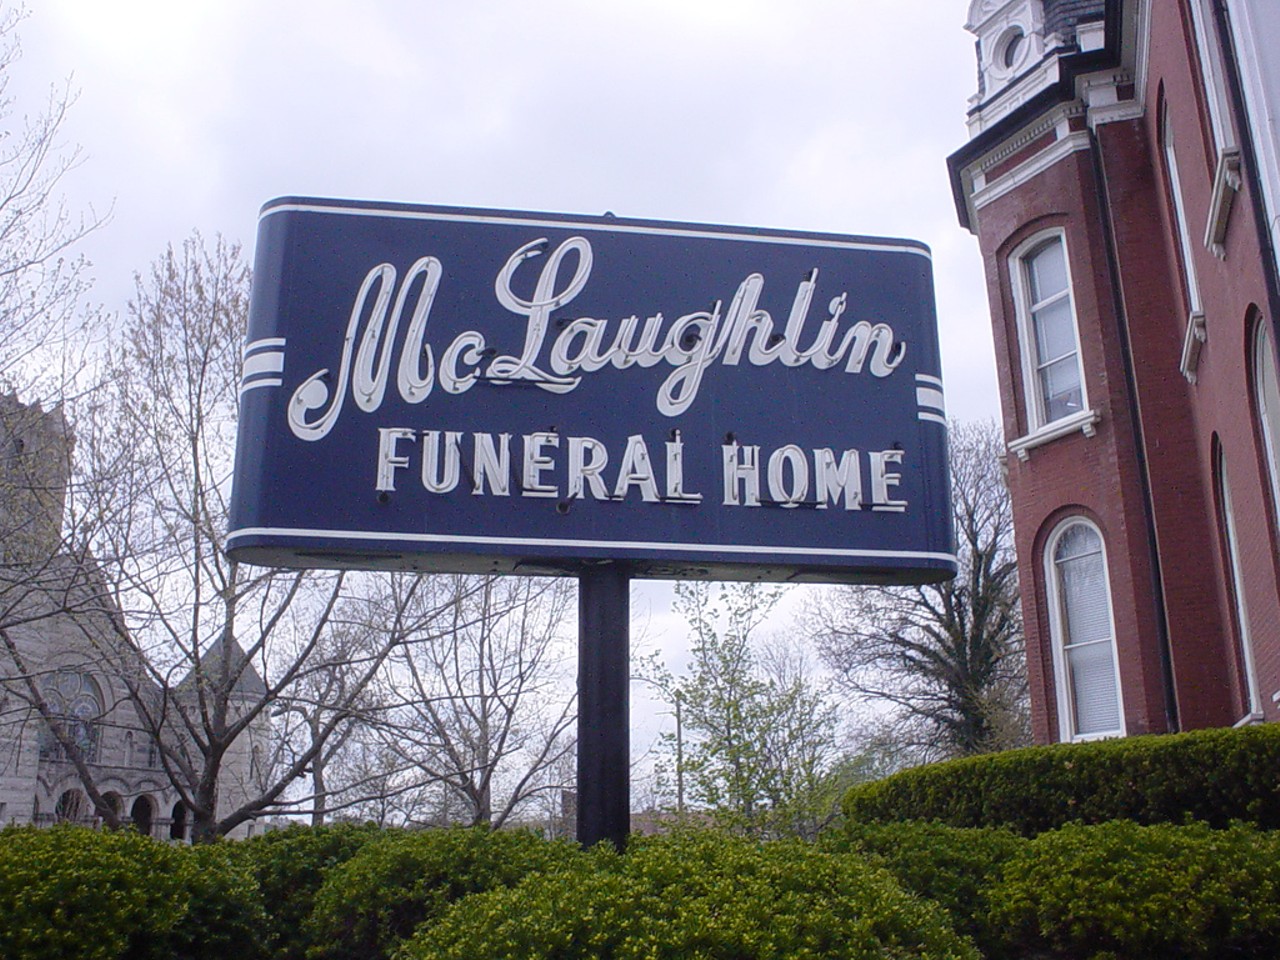 McLaughlin Funeral Home
2301 Lafayette Ave.
When the Lafayette Square neighborhood association held a murder mystery fundraiser earlier this year, the setting at the McLaughlin Funeral Home was definitely an attention-grabber -- but no more so than the stately mansion proved to be once party-goers were inside it. Though it was originally built as a single-family home (!) it managed to survive the great tornado of 1896 and eventually became a funeral home, which it remains today. But you should try to check out the beautiful space before you're the one being laid to rest. With elegant stained glass, elaborate chandeliers and a grand old staircase right out of Gone with the Wind, this place is way more gorgeous than the average funeral home.
Photo courtesy of Trish / Flickr